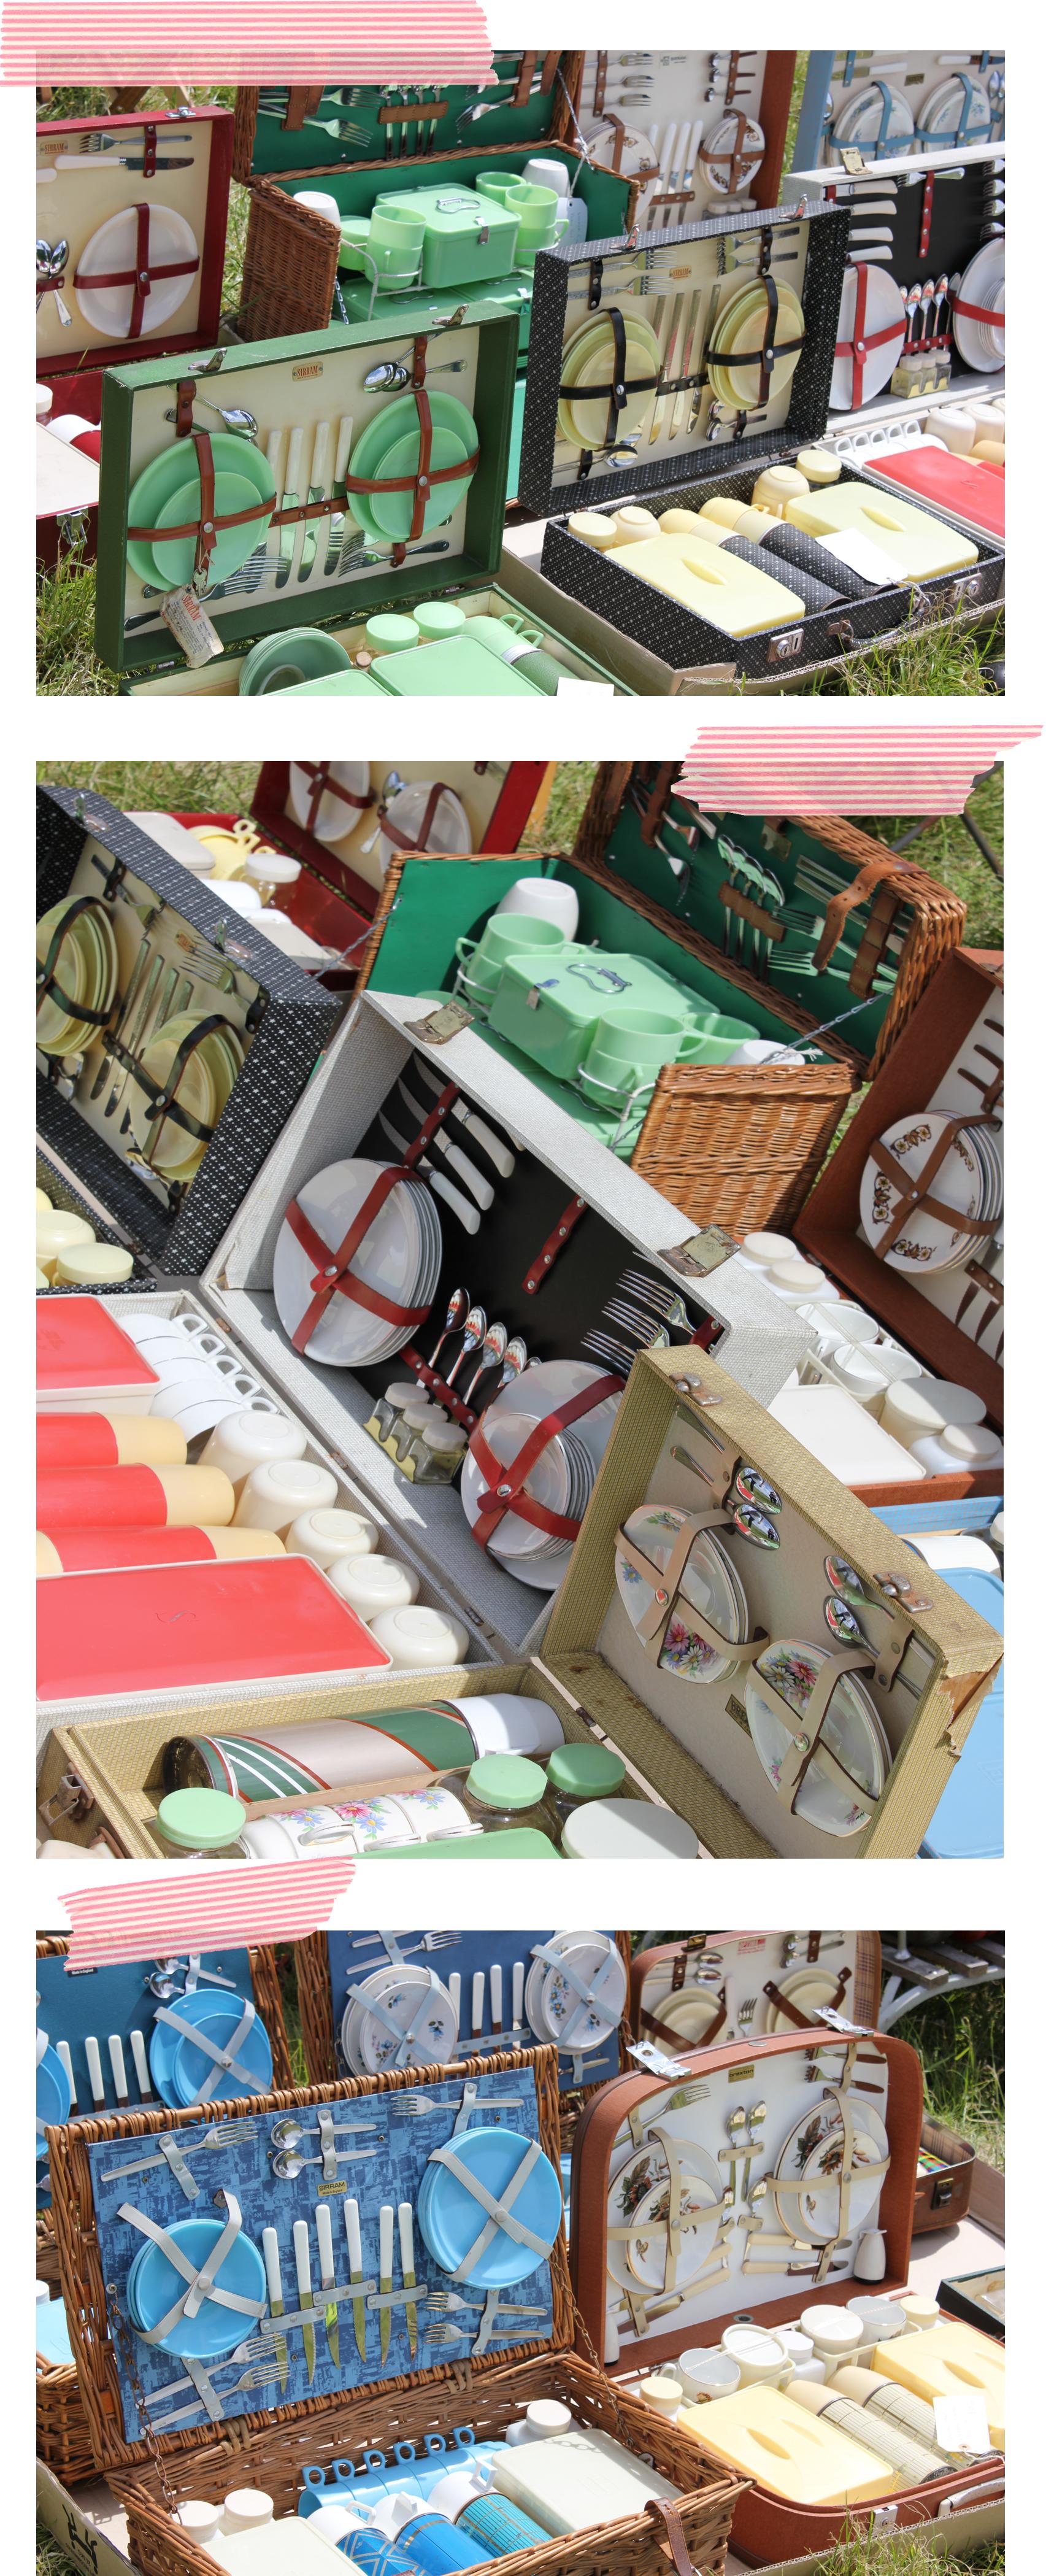 vintage picnic baskets and hampers with thermos flasks